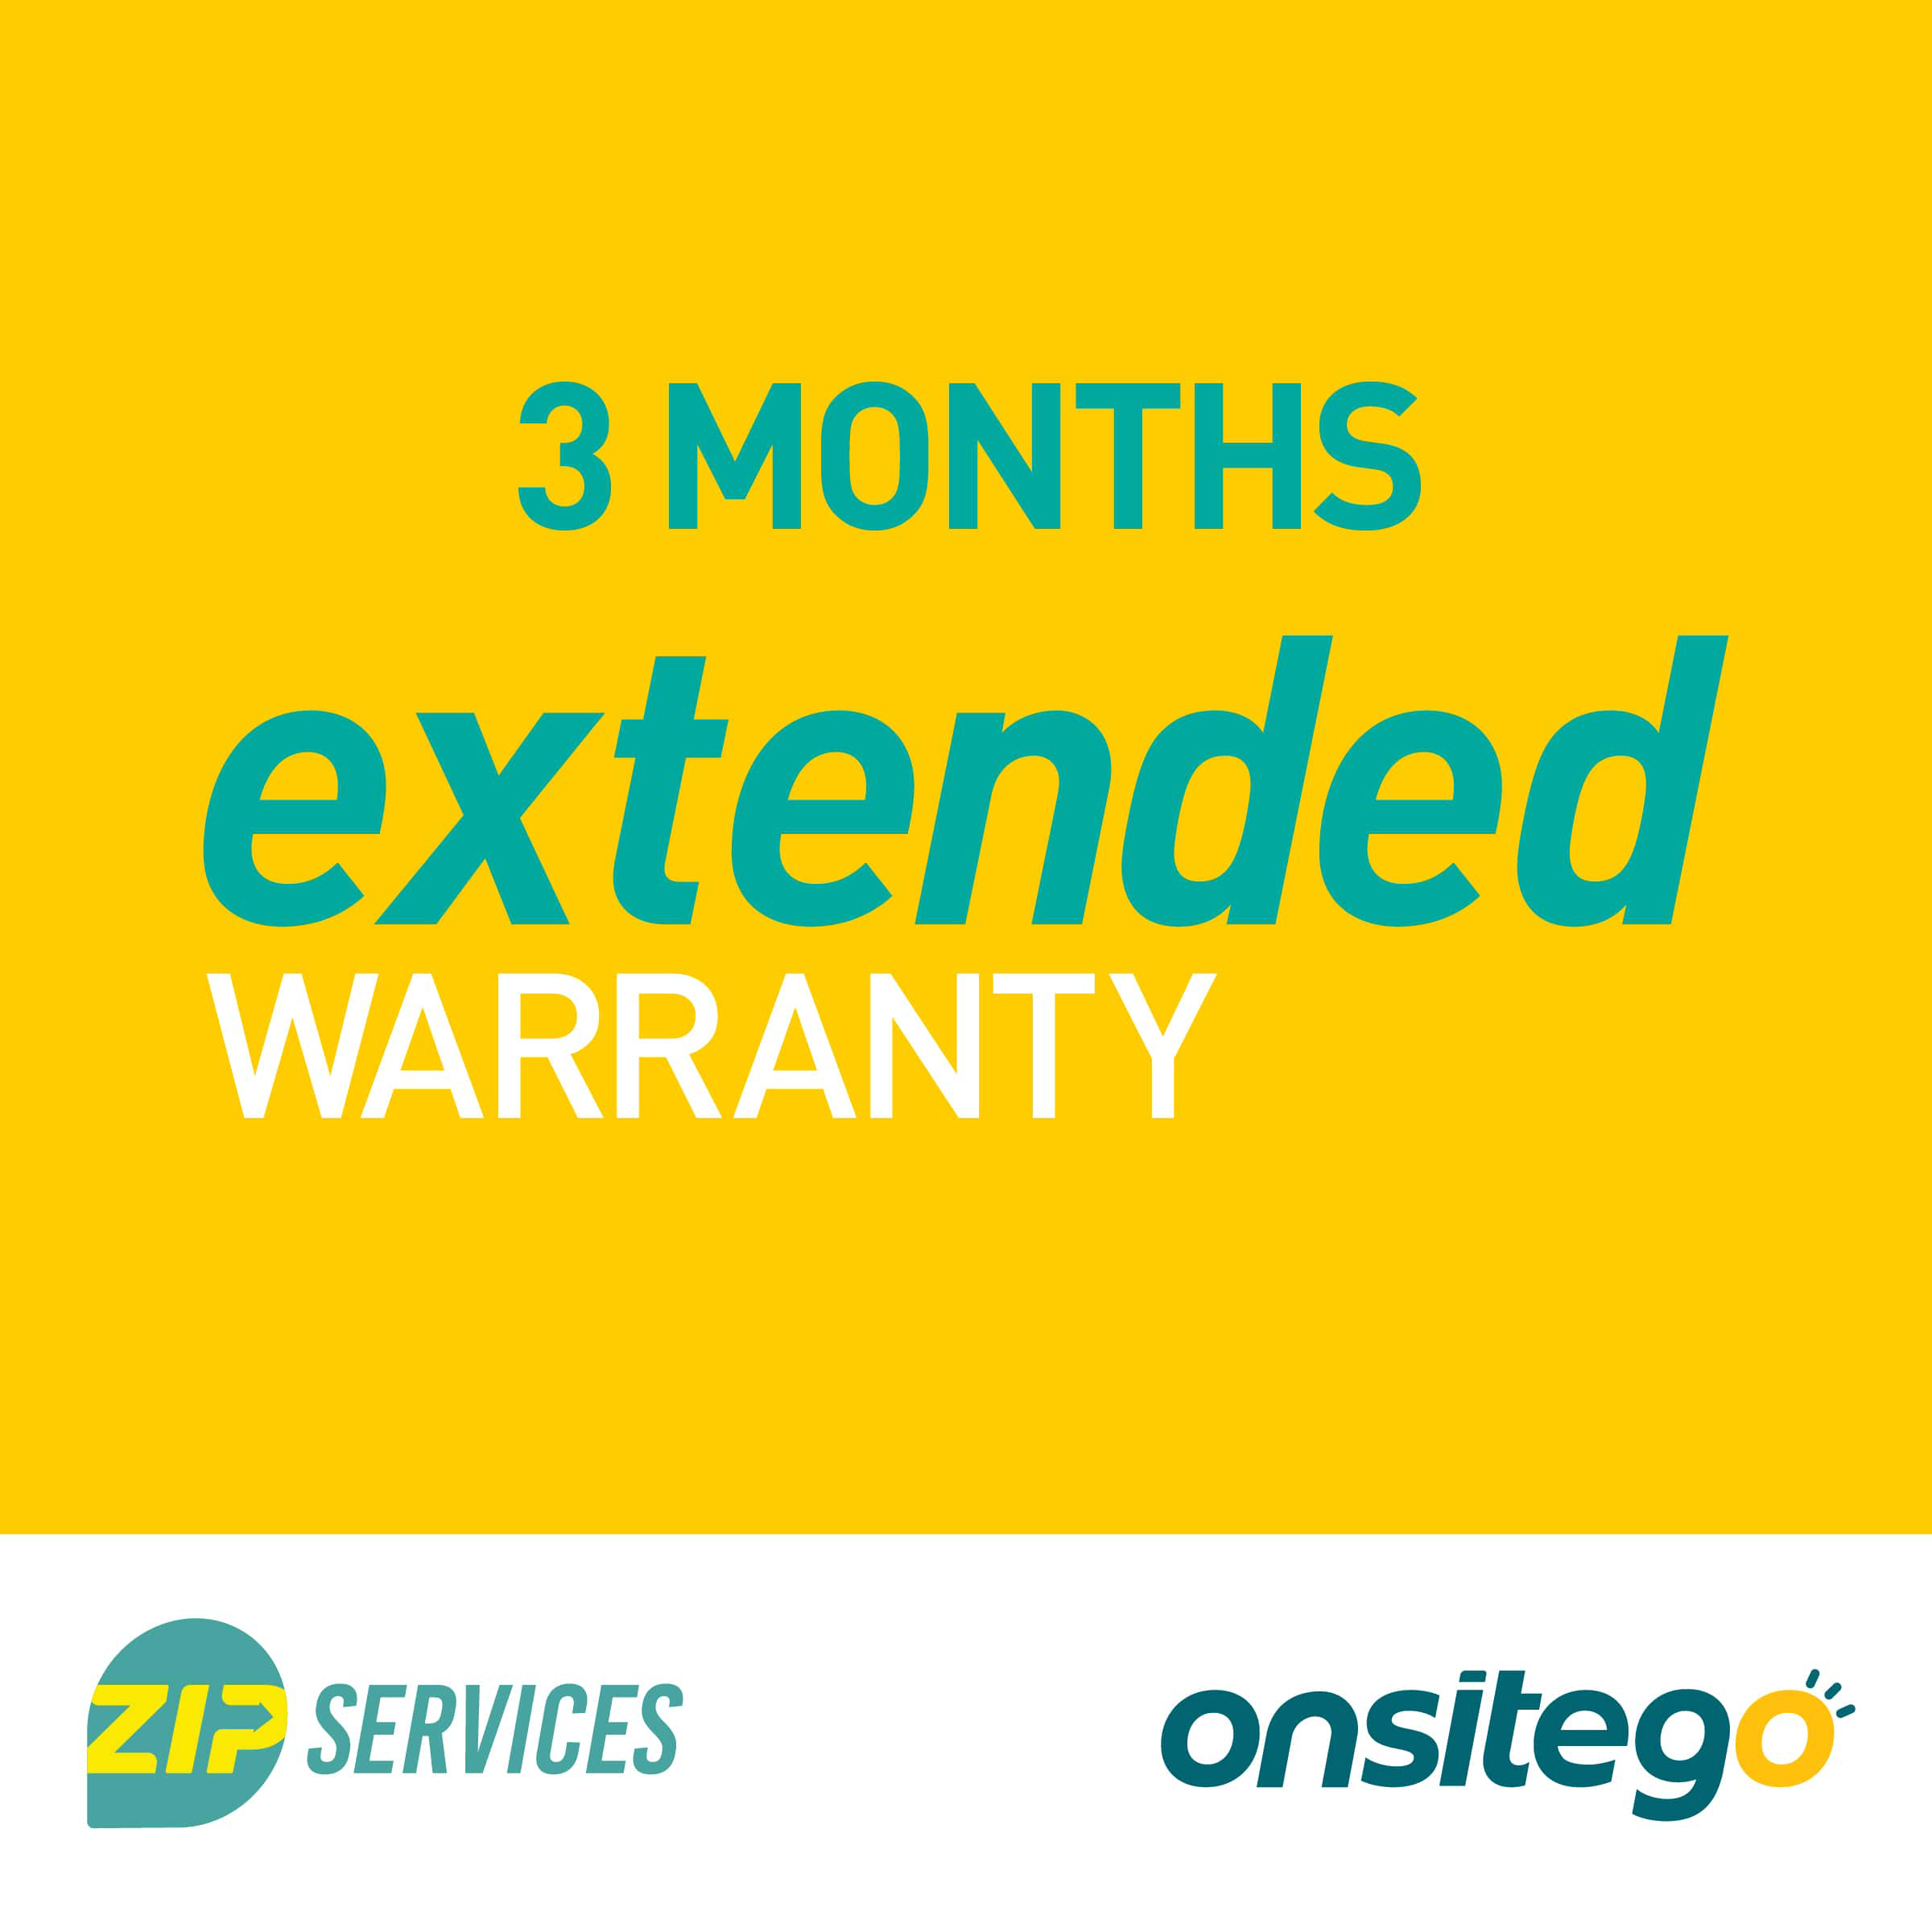 OnsiteGo 3 Months Extended Warranty for Mobile Accessory  Rs.5001 - Rs.6000_1